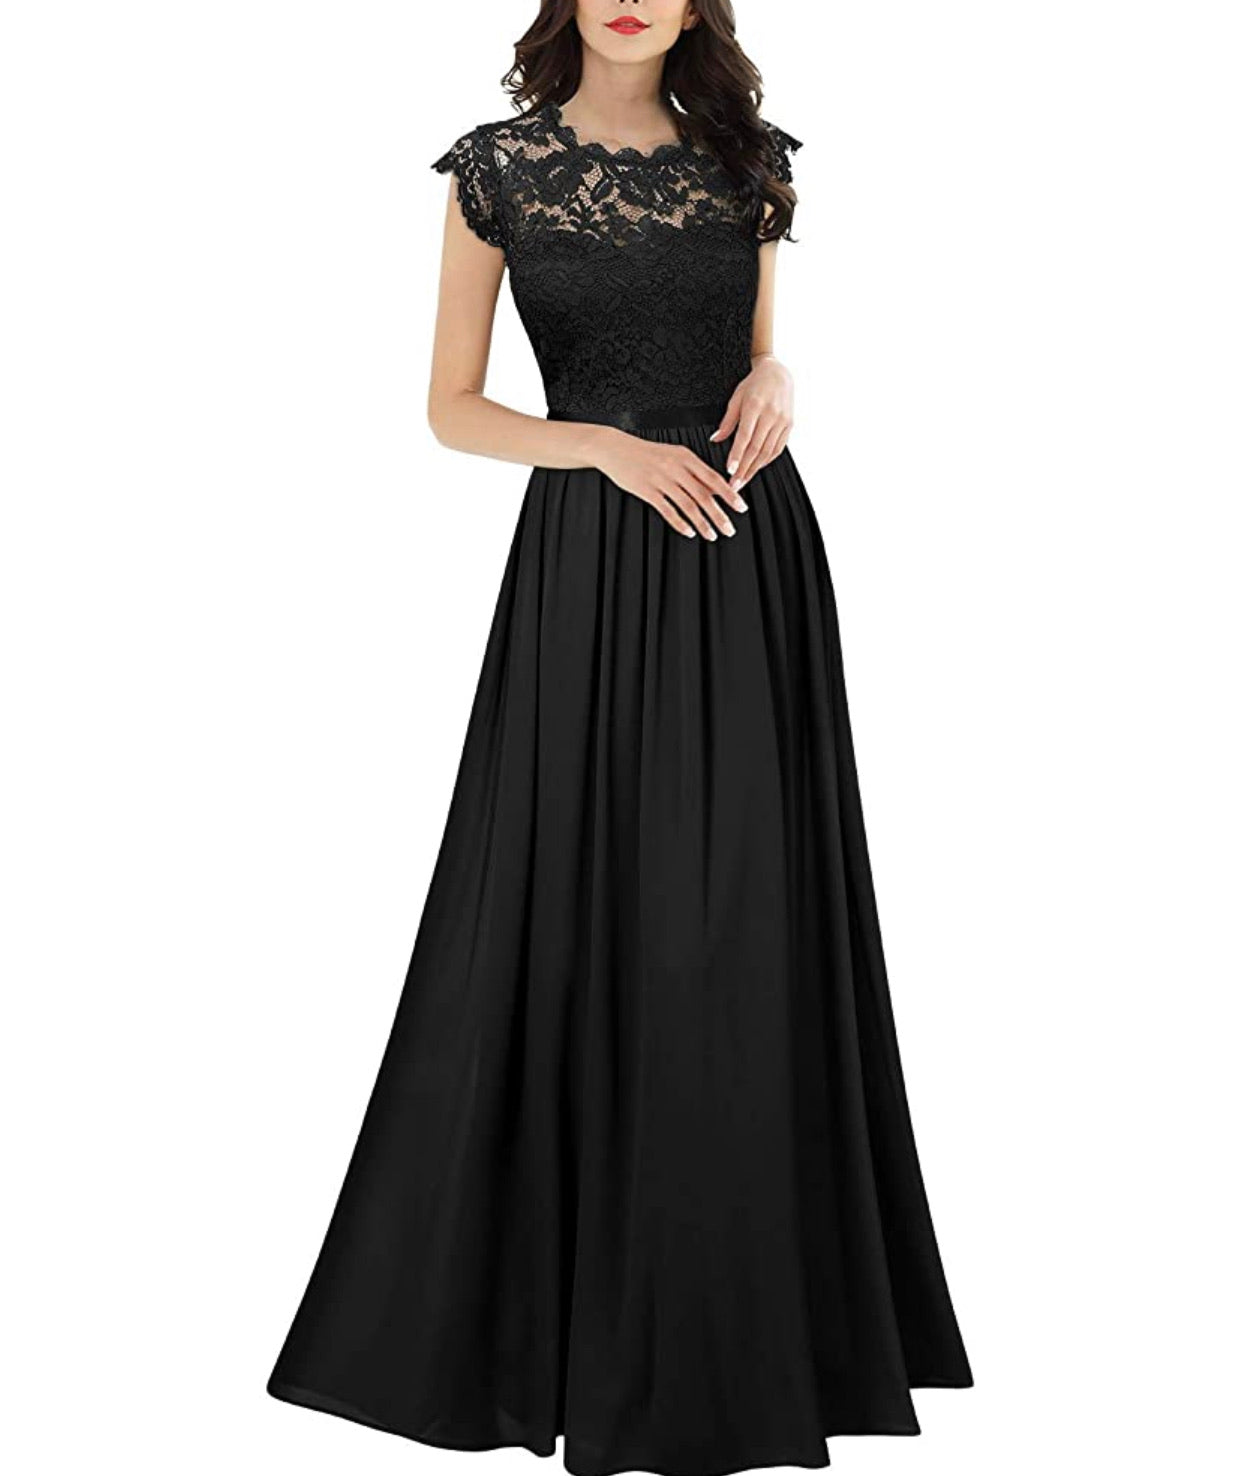 Formal Floral Lace Long Length Dress, Sizes Small - 2XLarge (Black Dress)